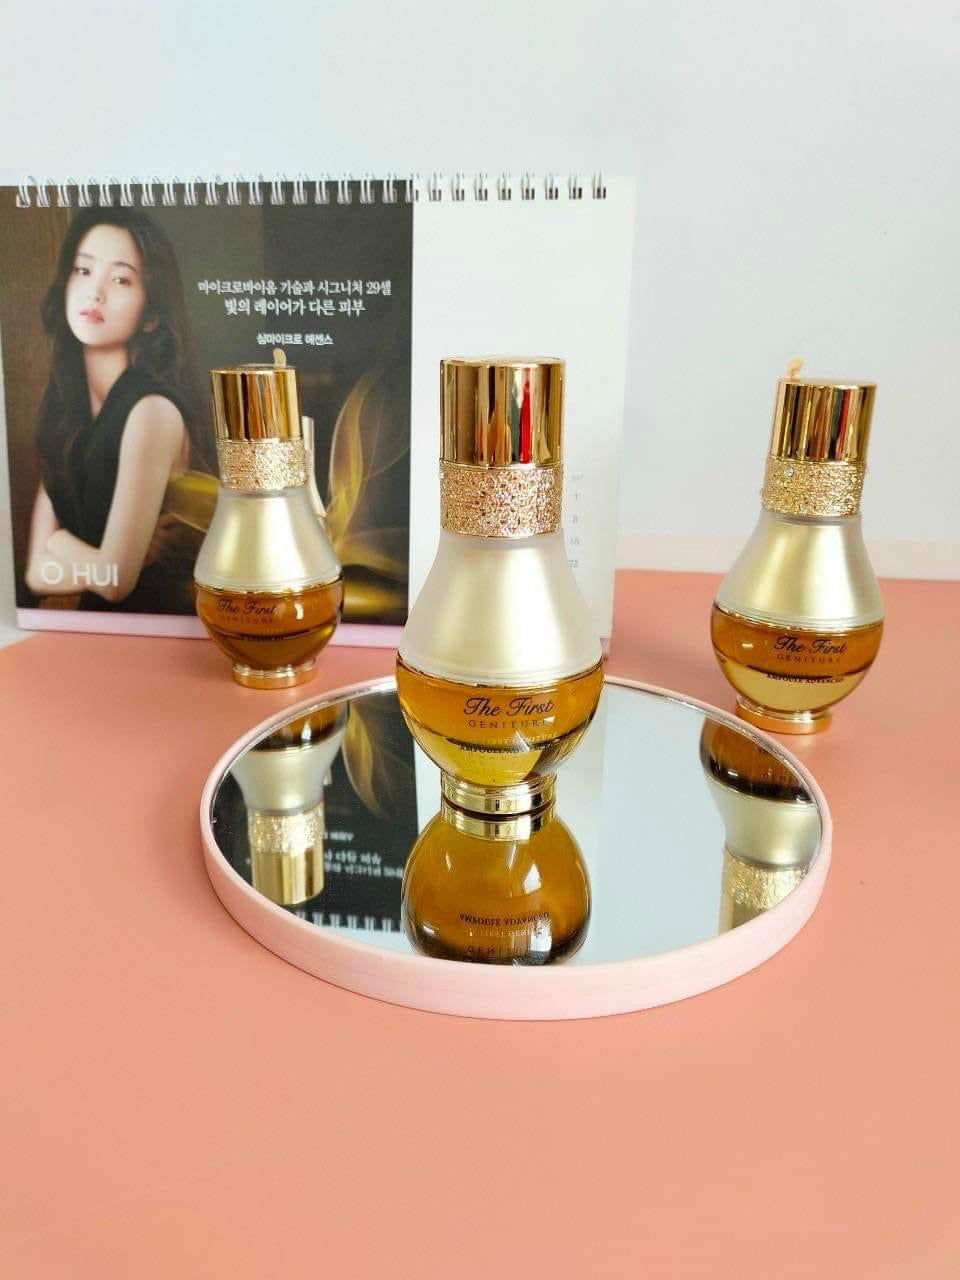 Tinh chat vang Ohui the first 20ml